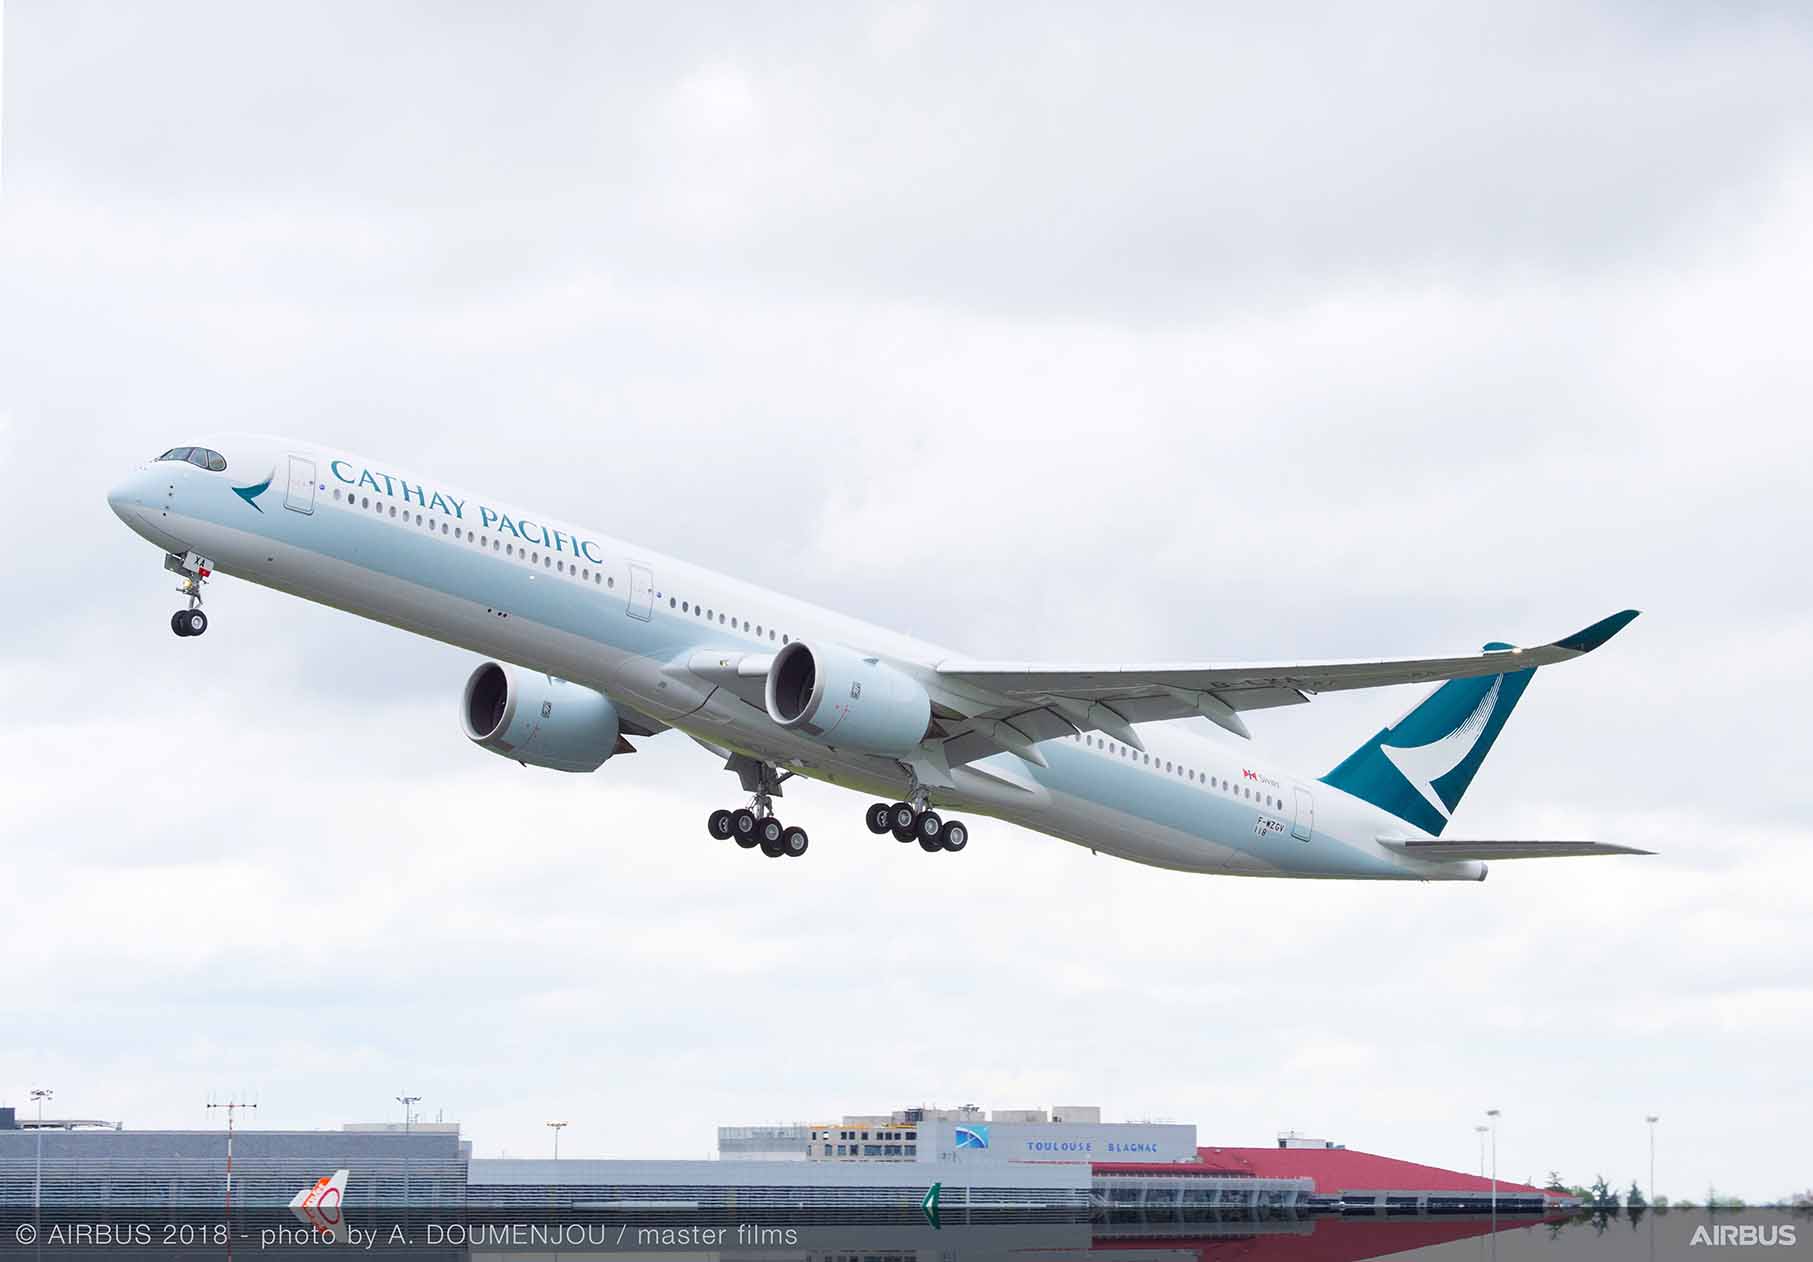 Cathay Pacific revamps corporate loyalty programme